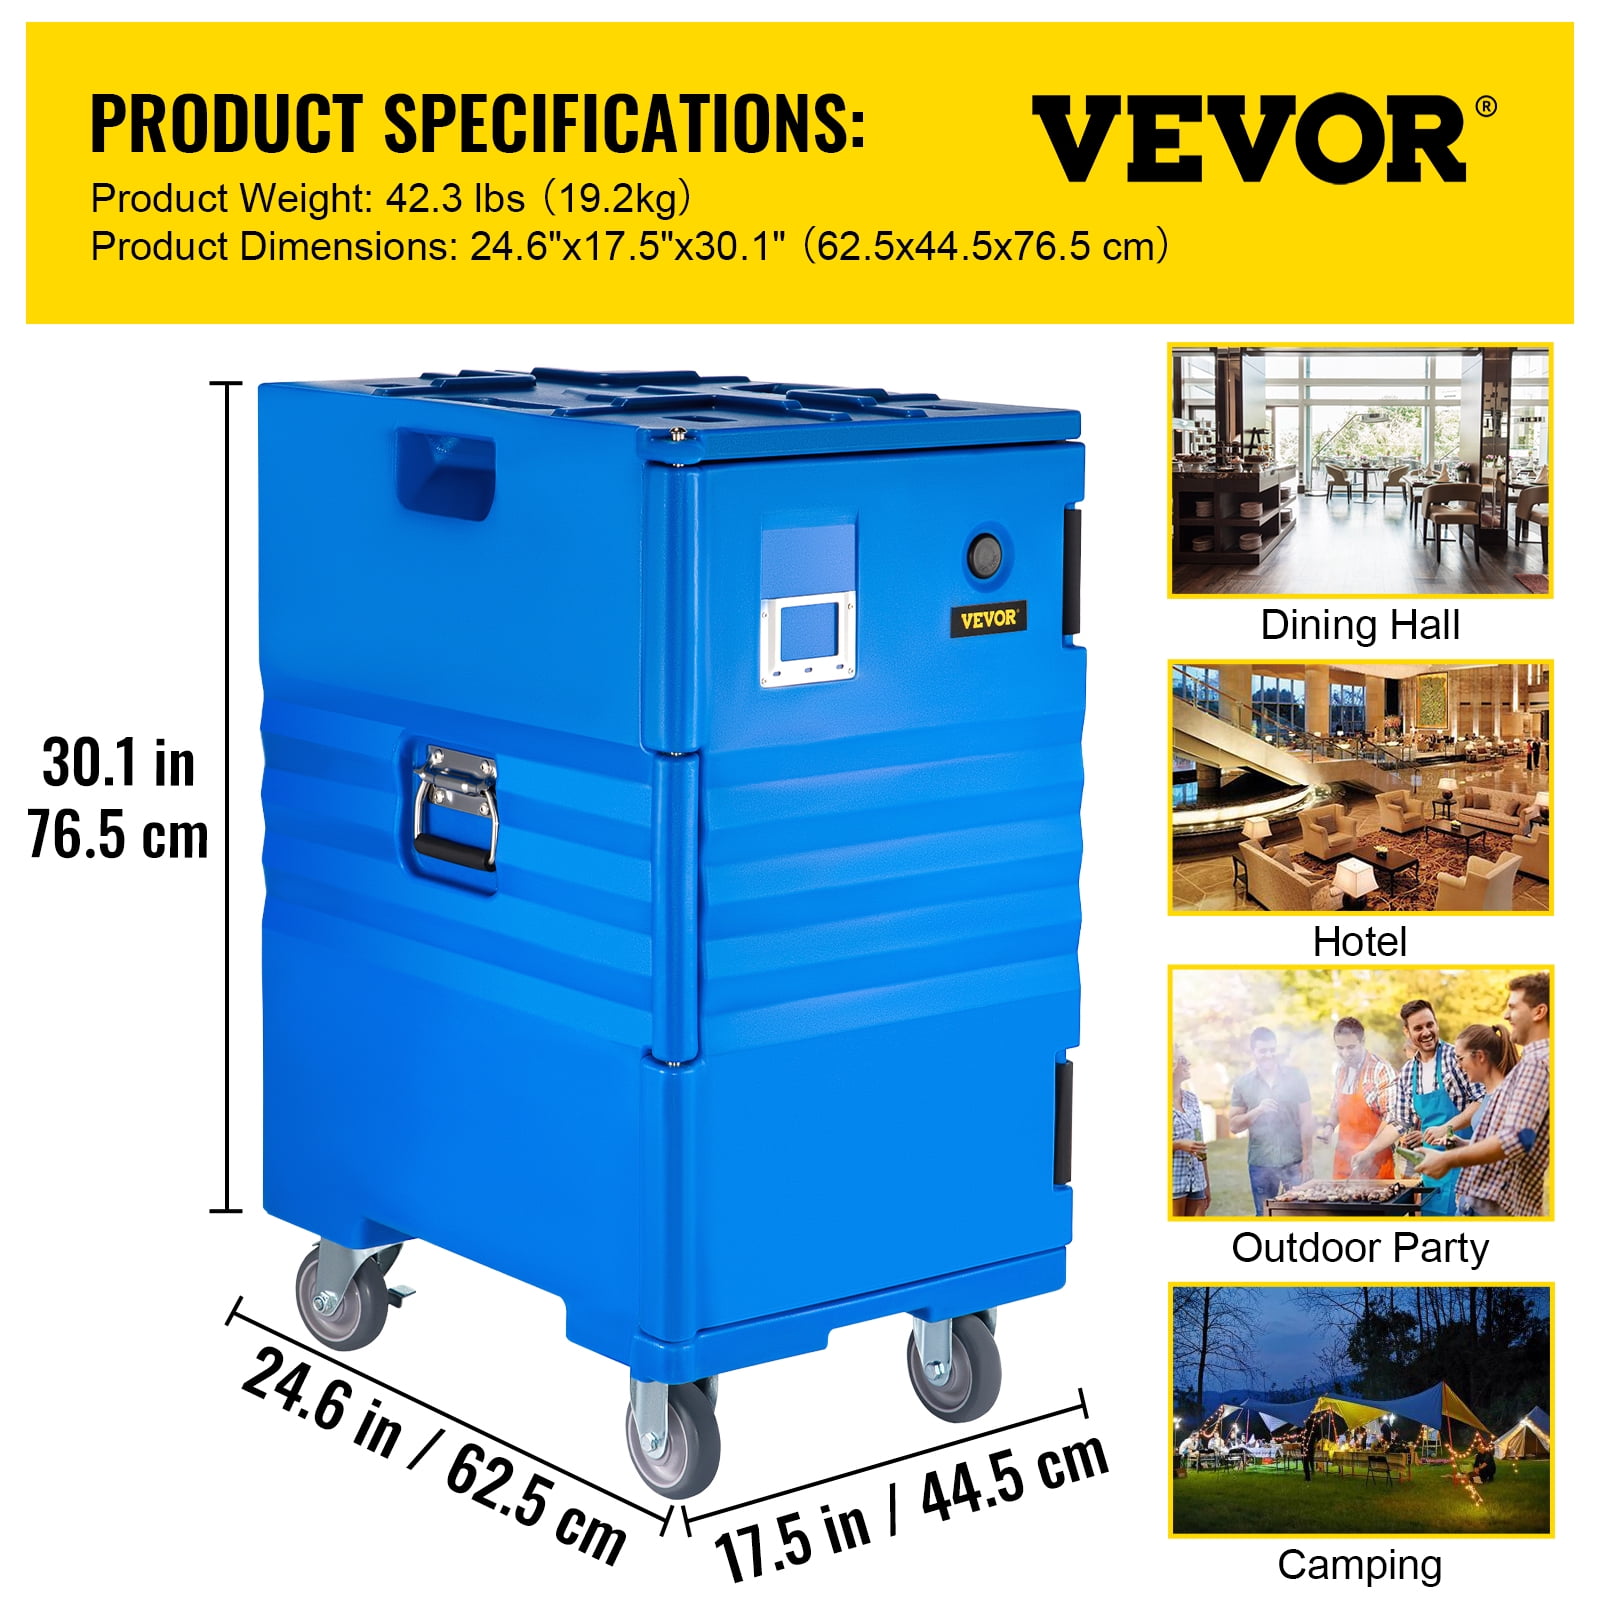 VEVOR Insulated Food Pan Carrier 109 qt. Hot Box Food Box Carrier with Double Buckles for Restaurant, Black